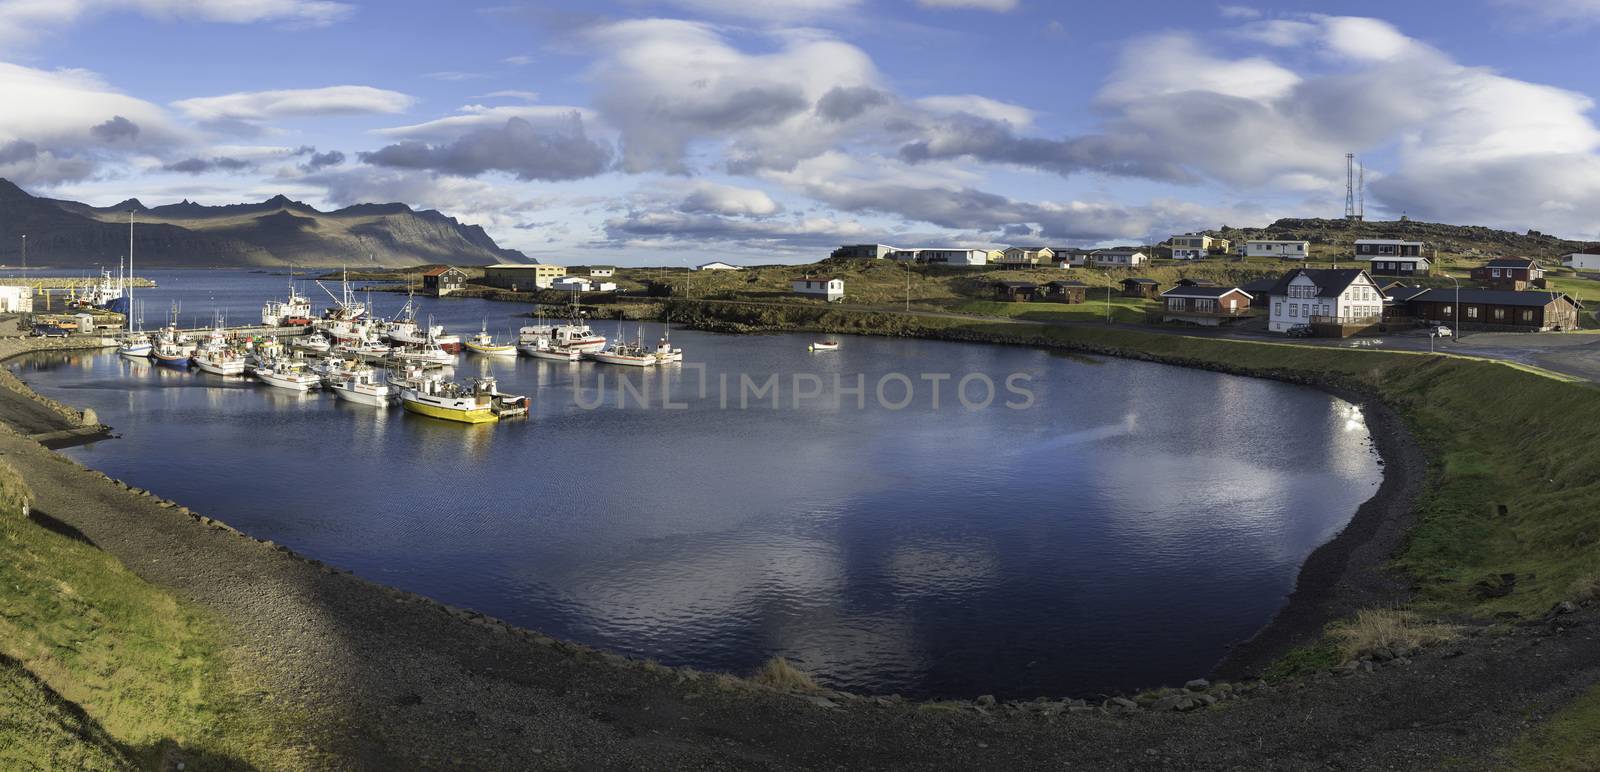 ICELAND : Djupivogur is a small town and harbor by udompeter